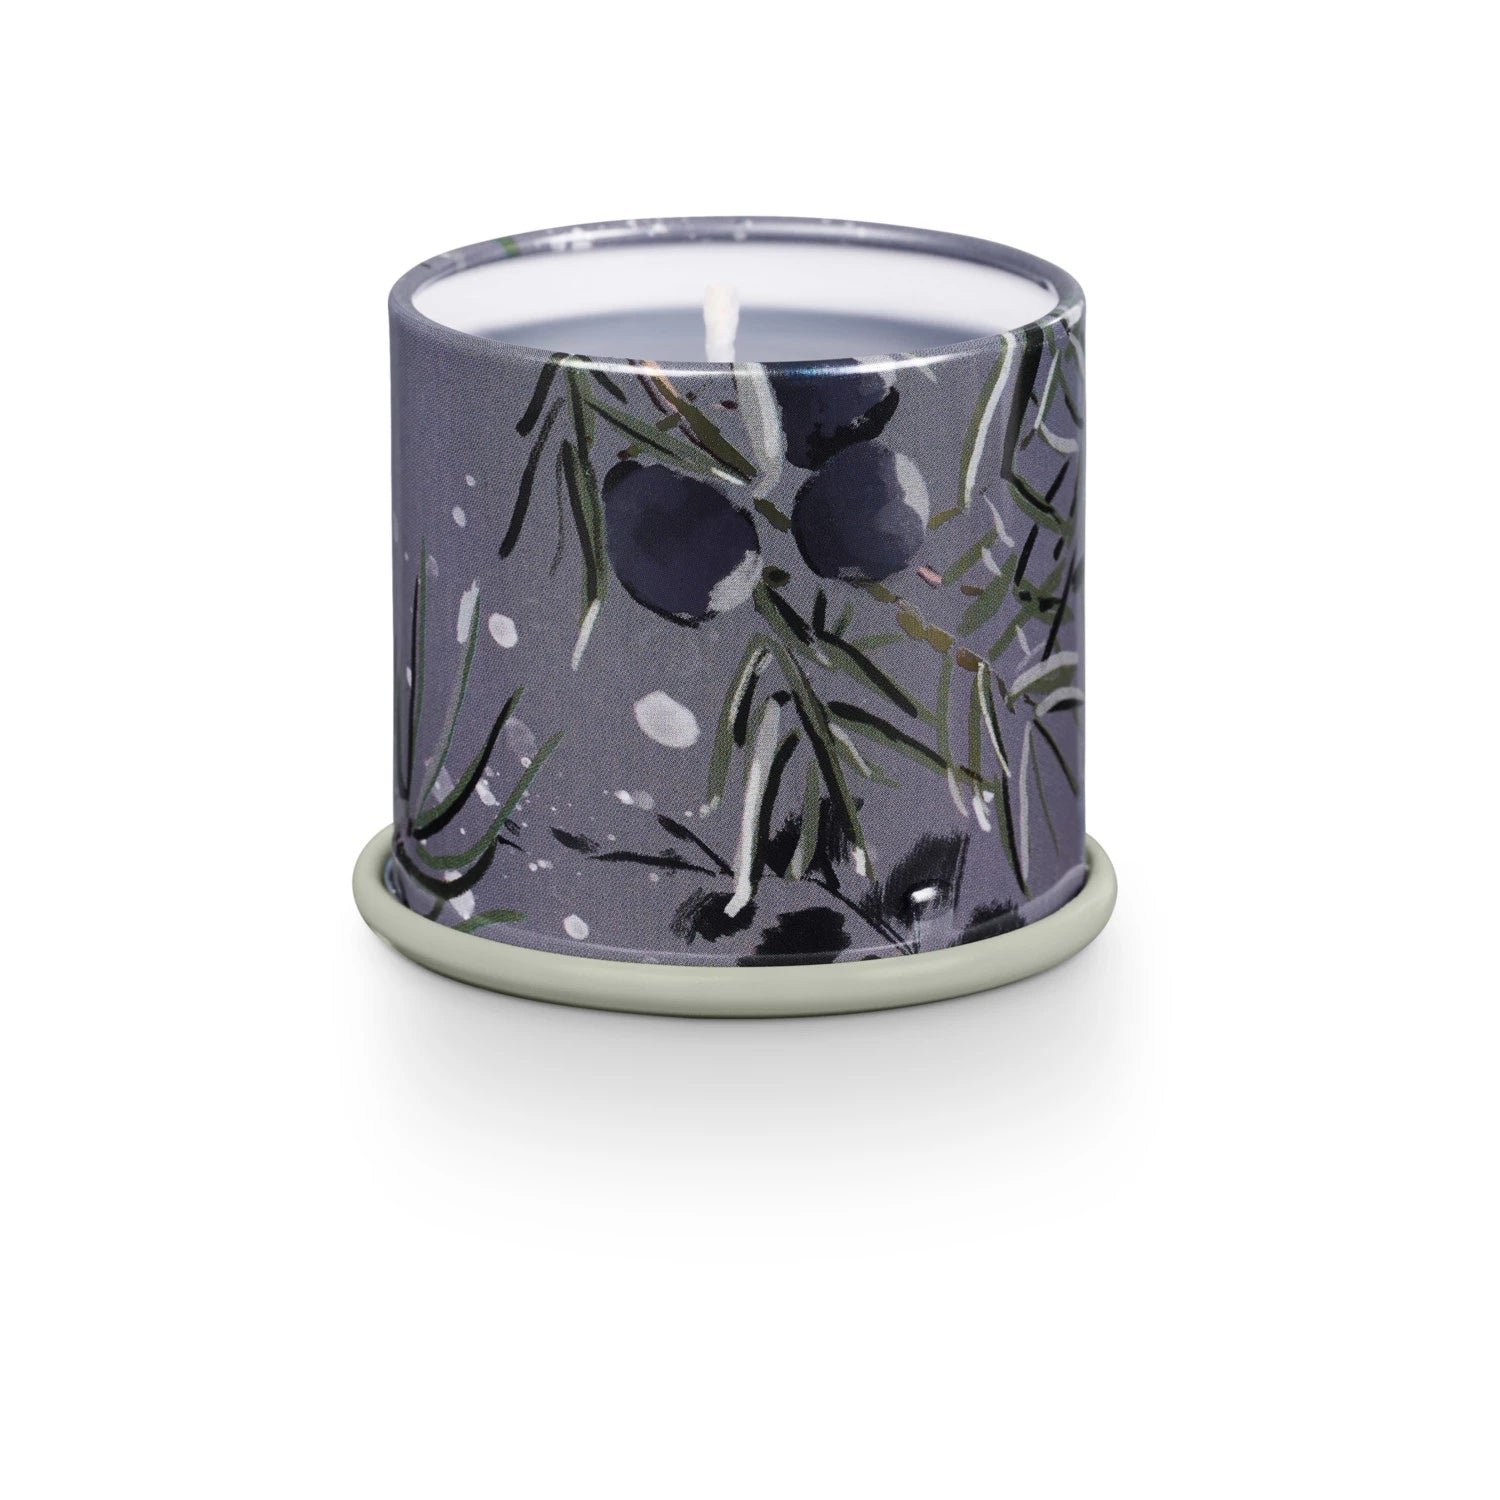 The North Sky Demi Vanity Tin Candle